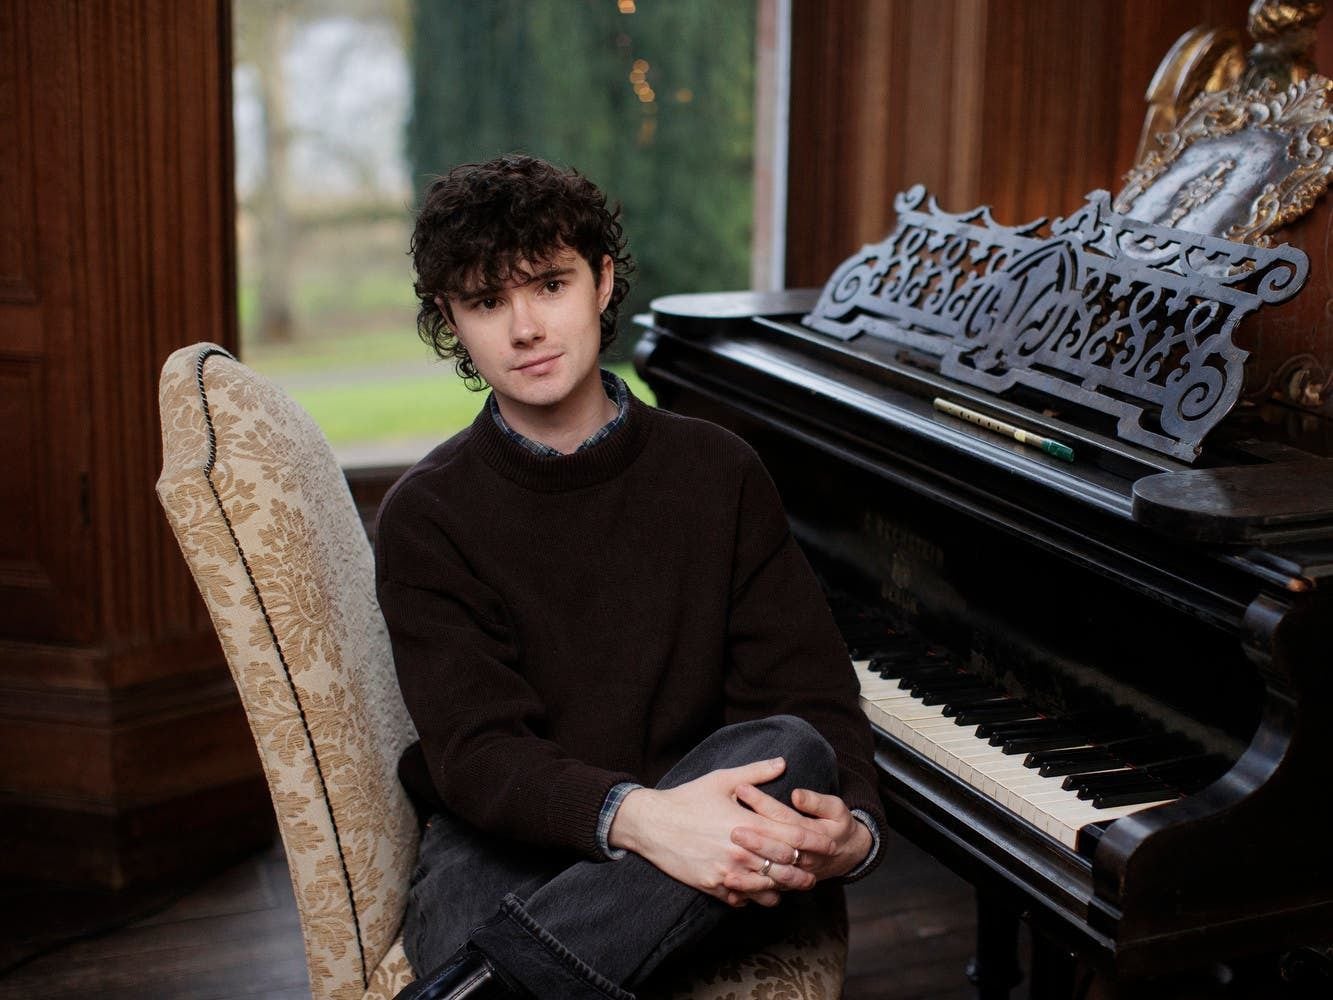 Monaghan pianist says topping charts has turned his life ‘upside down’